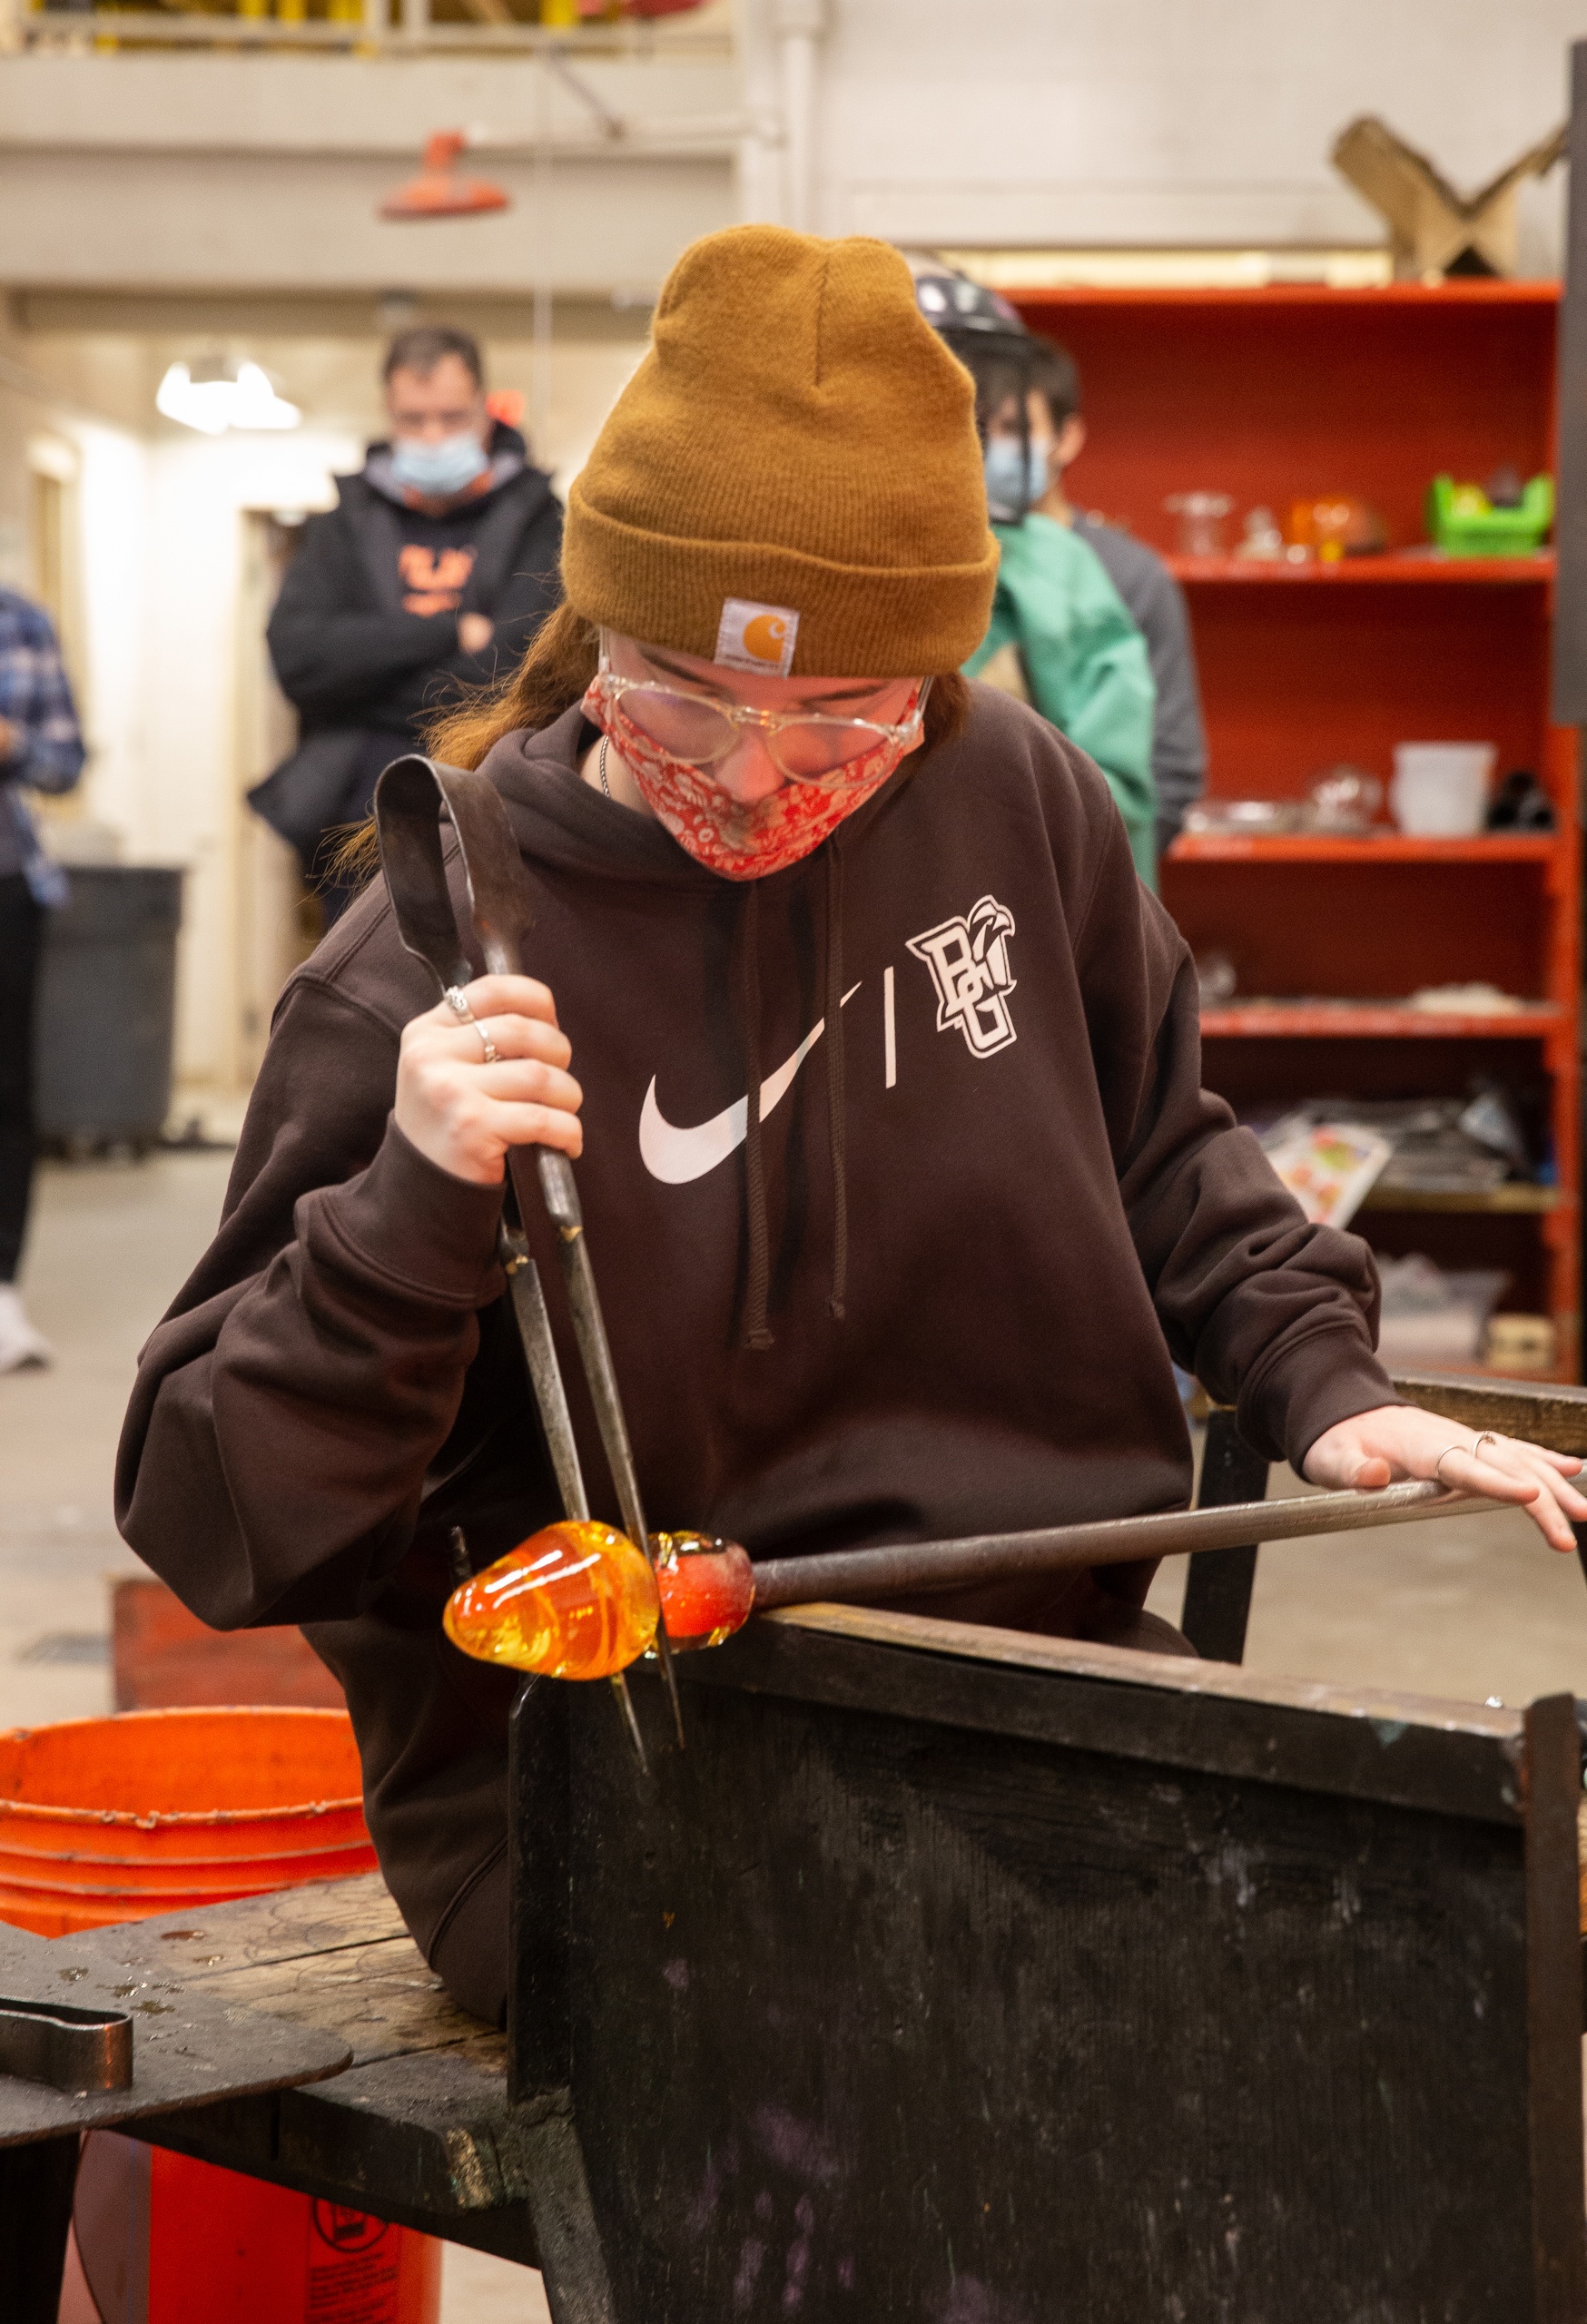 Student demonstrates glass blowing techniques while spinning a piece of glass